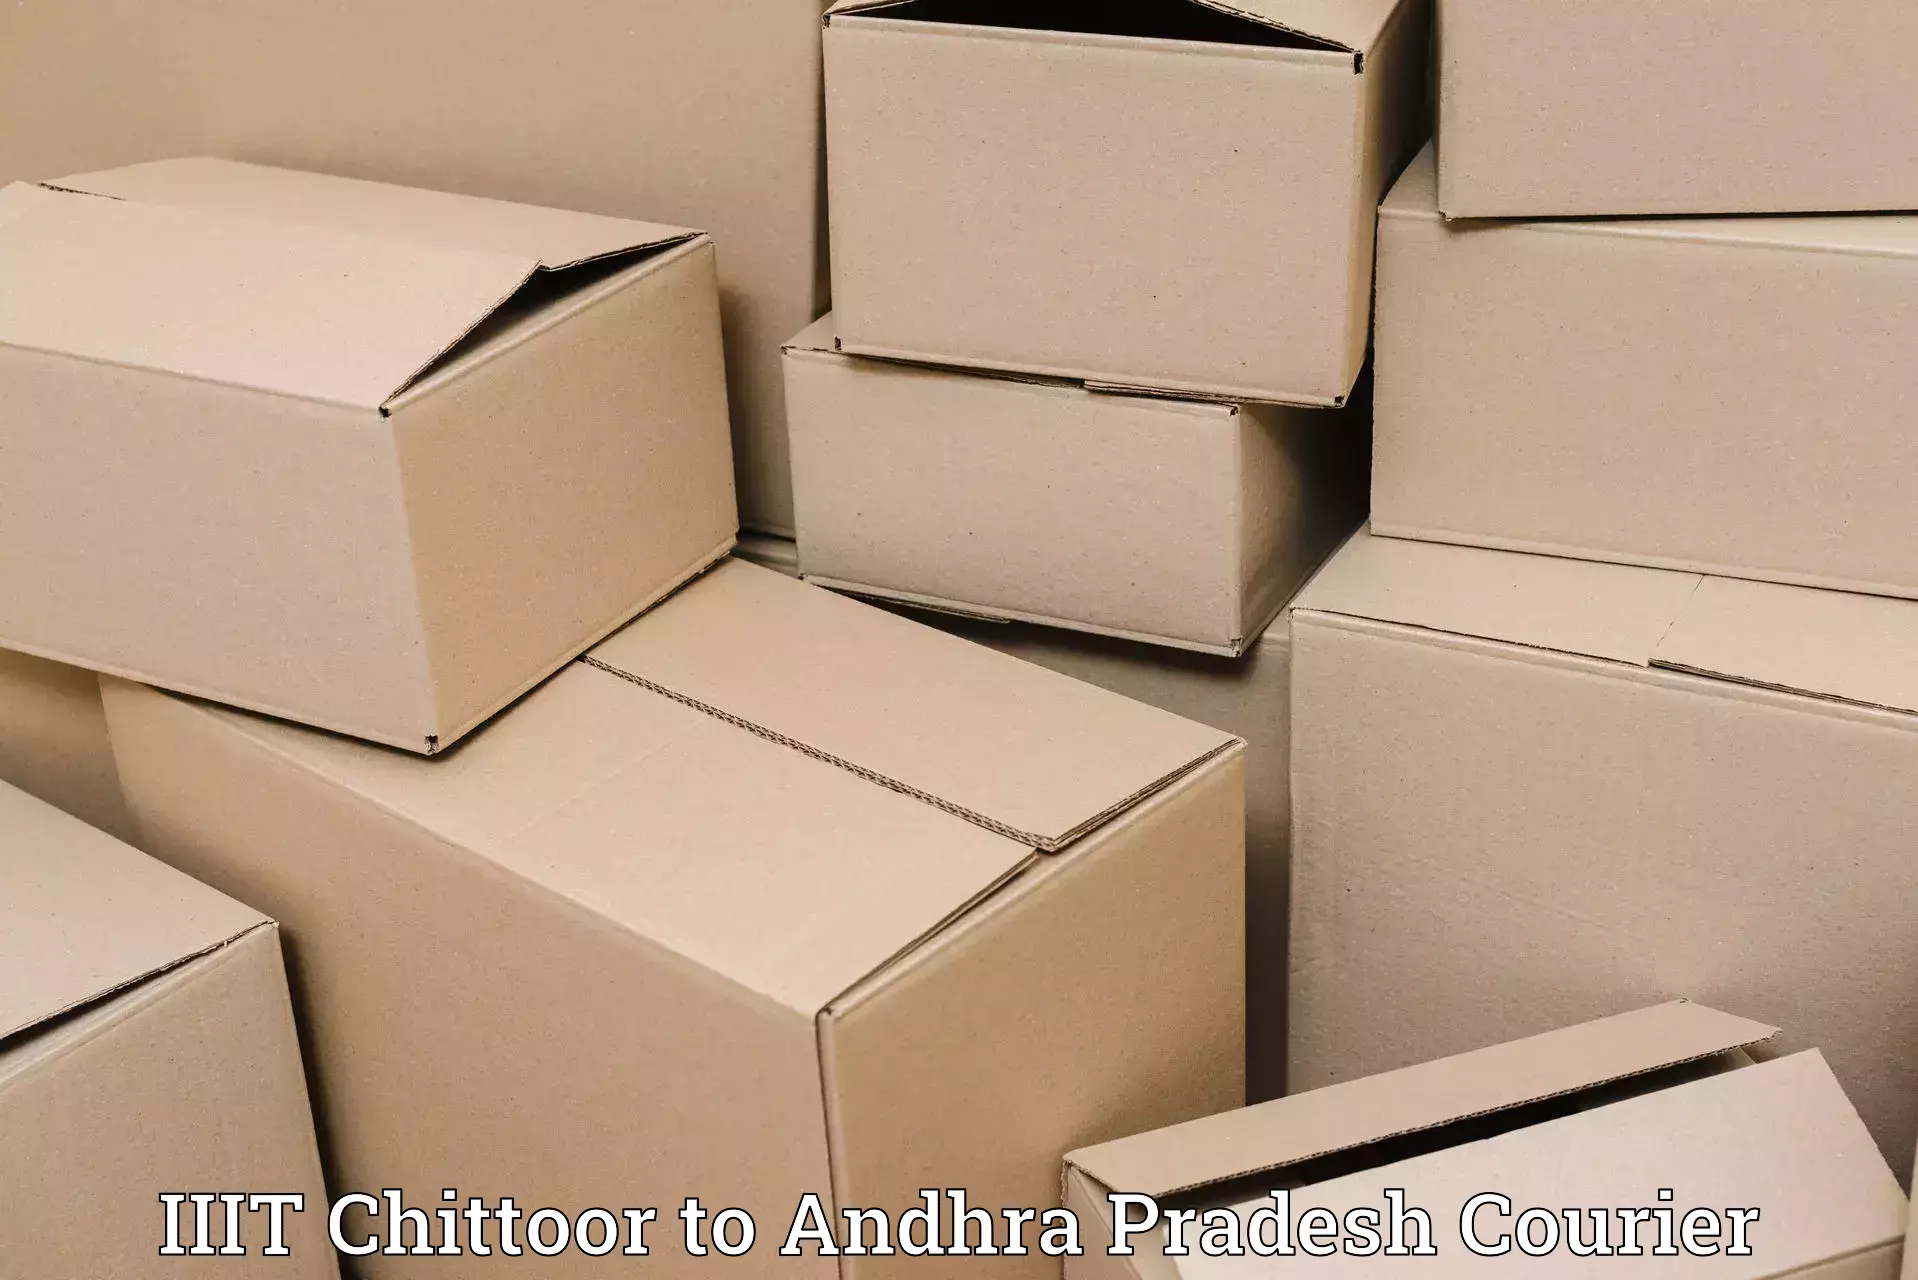 Express courier facilities in IIIT Chittoor to Chodavaram